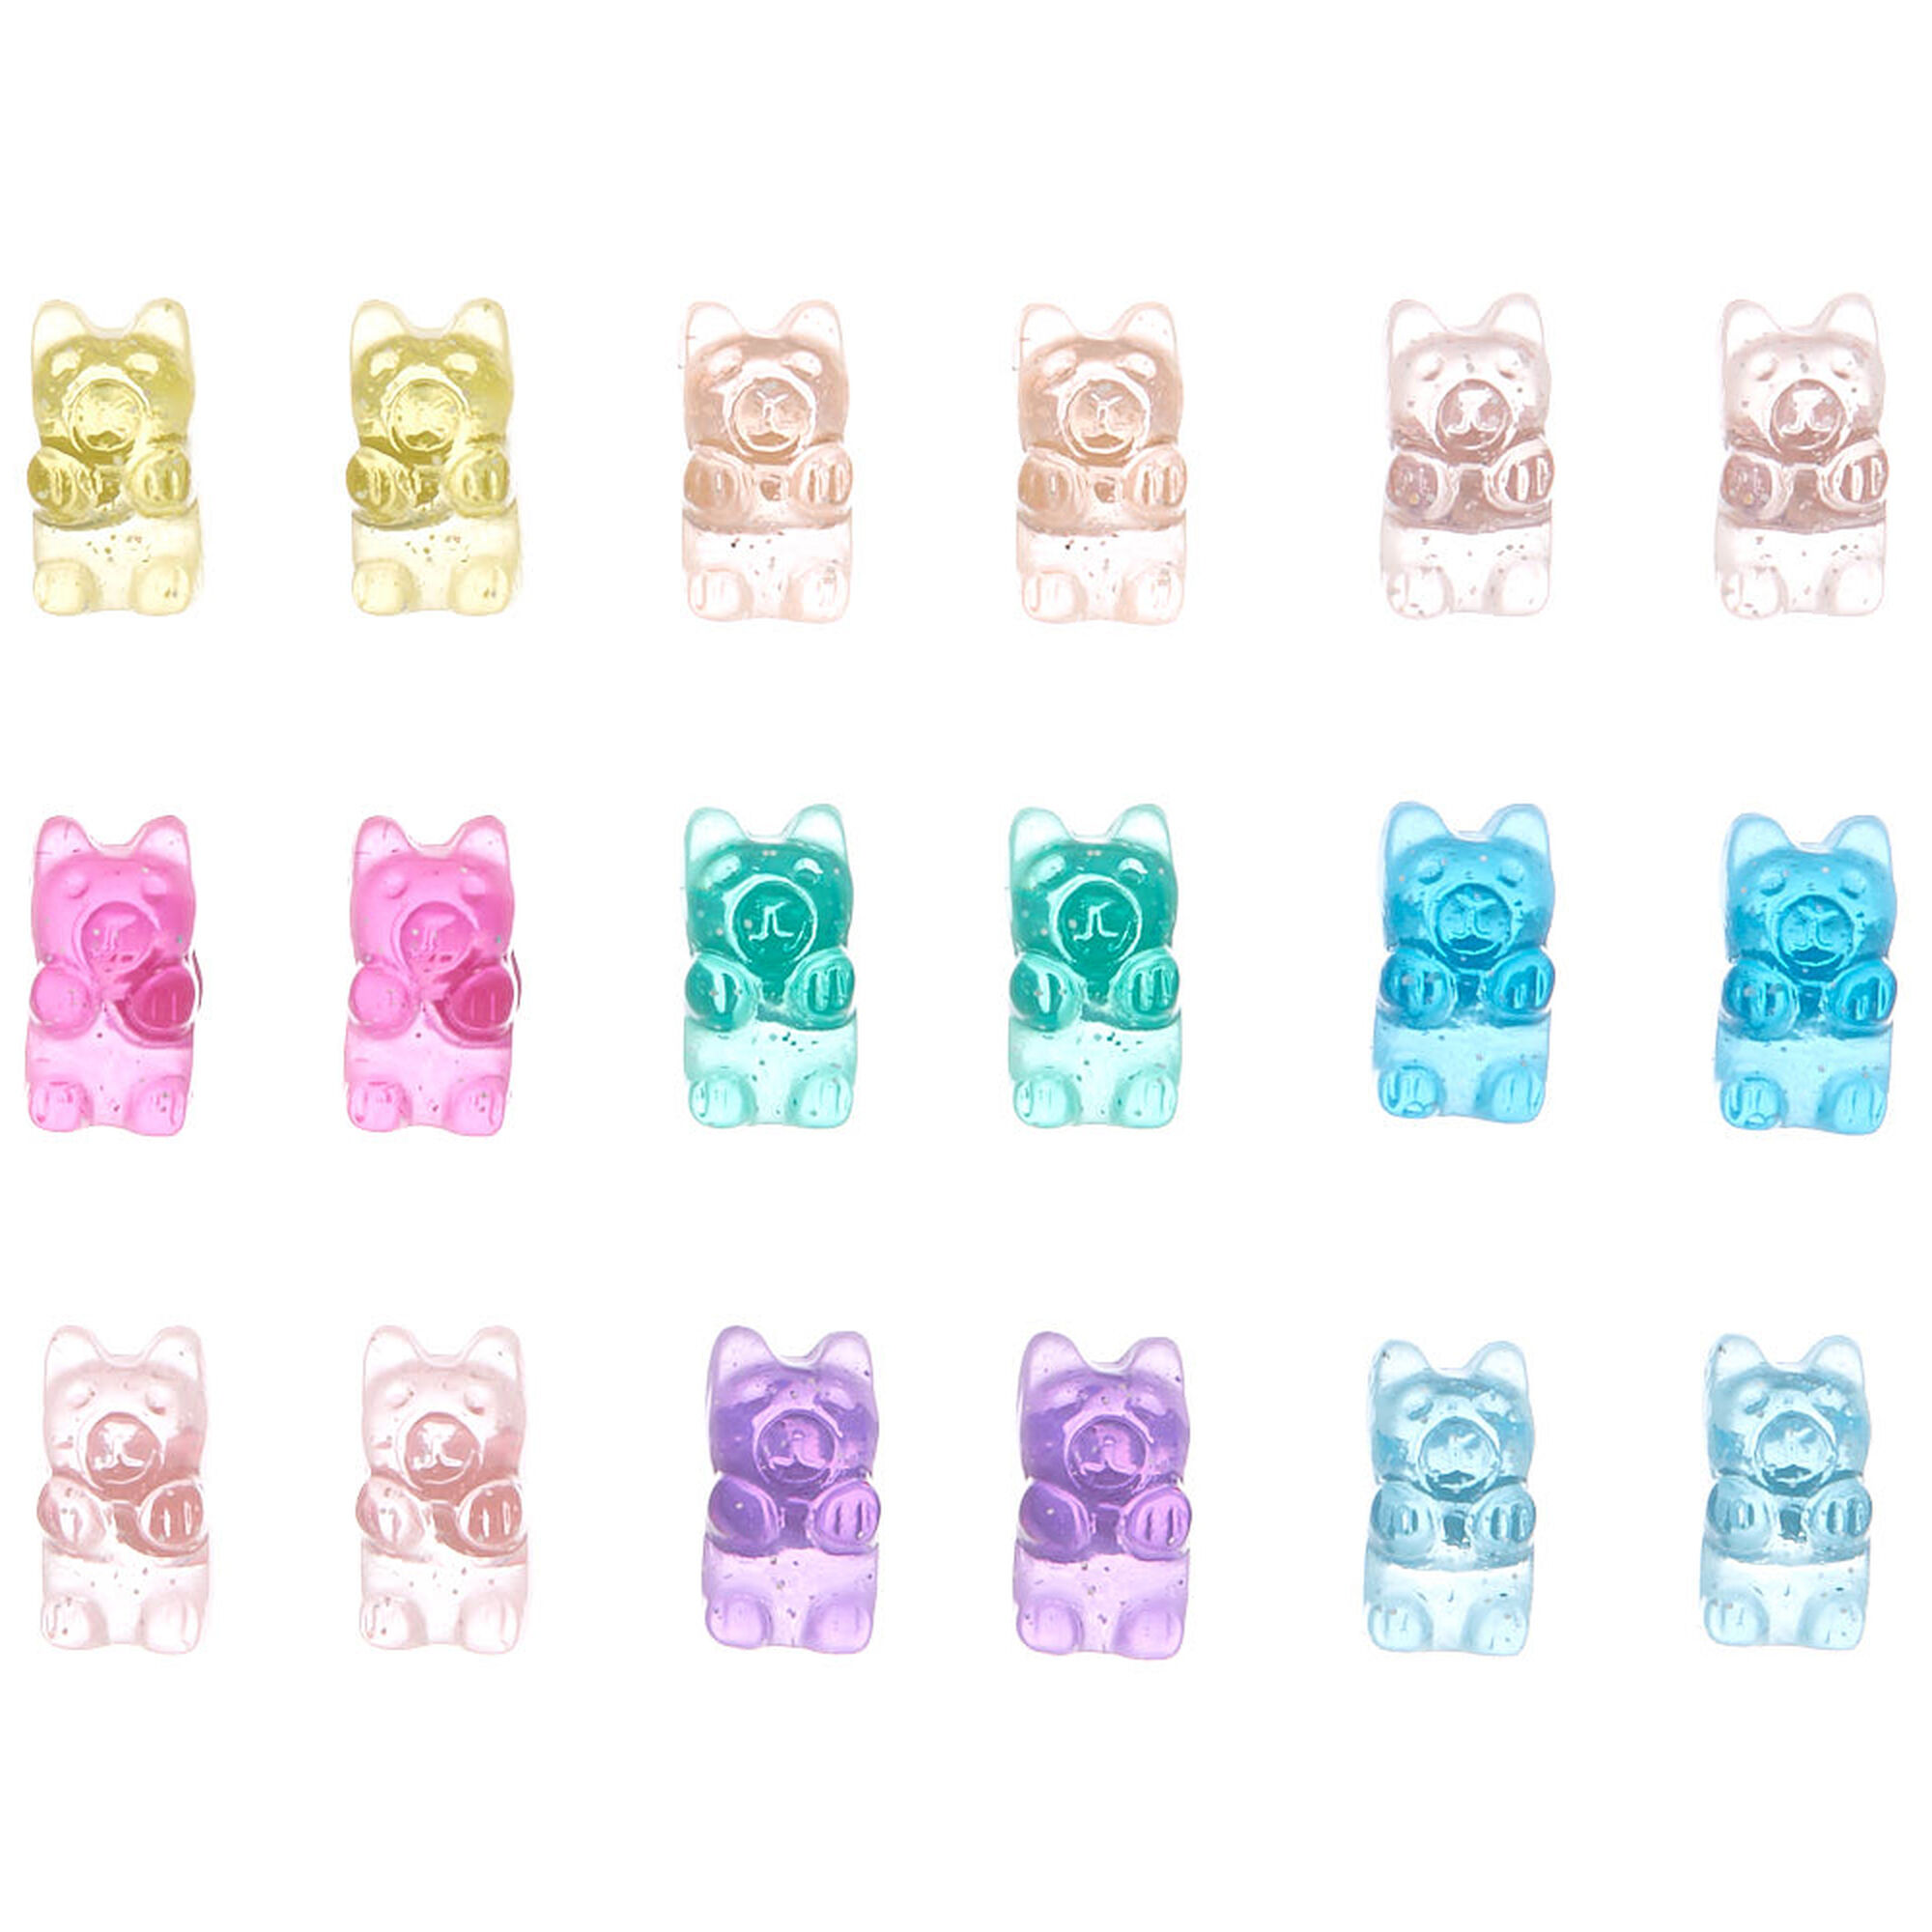  Claire's Glow In The Dark Gummy Bear Earrings - 3 Pairs of 1''  Drop Earrings Silver Pastel Colored Sweet Treat Food Theme Accessories for  Girls: Clothing, Shoes & Jewelry